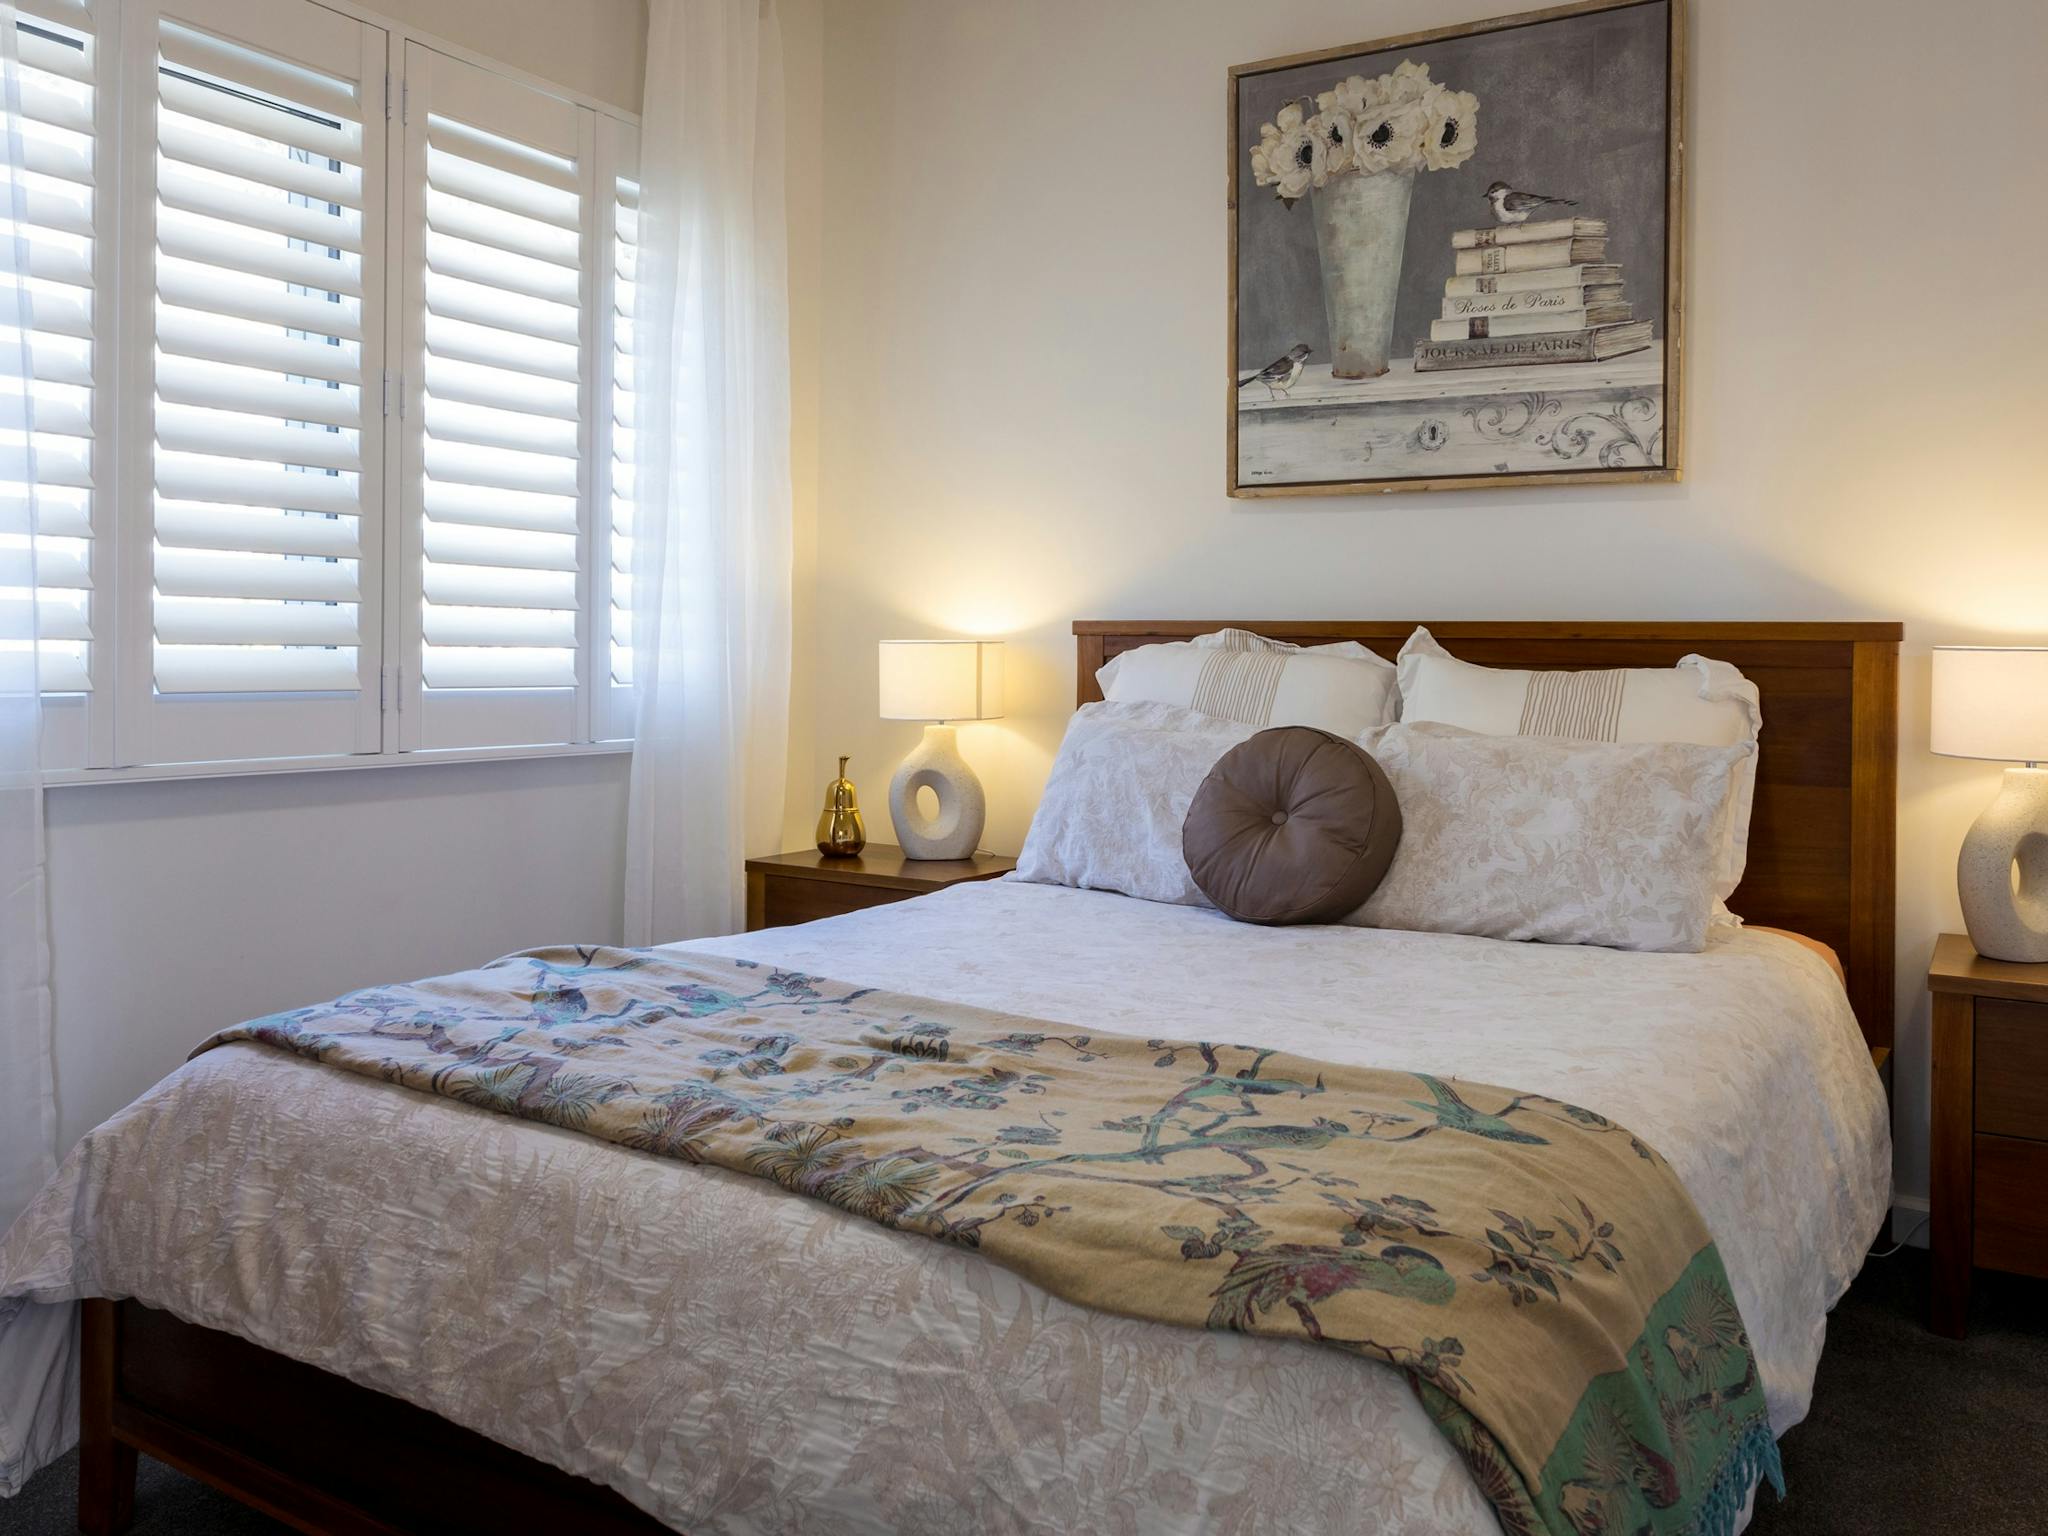 Bedroom, queen size bed, pillows, lamp, plantation shutters